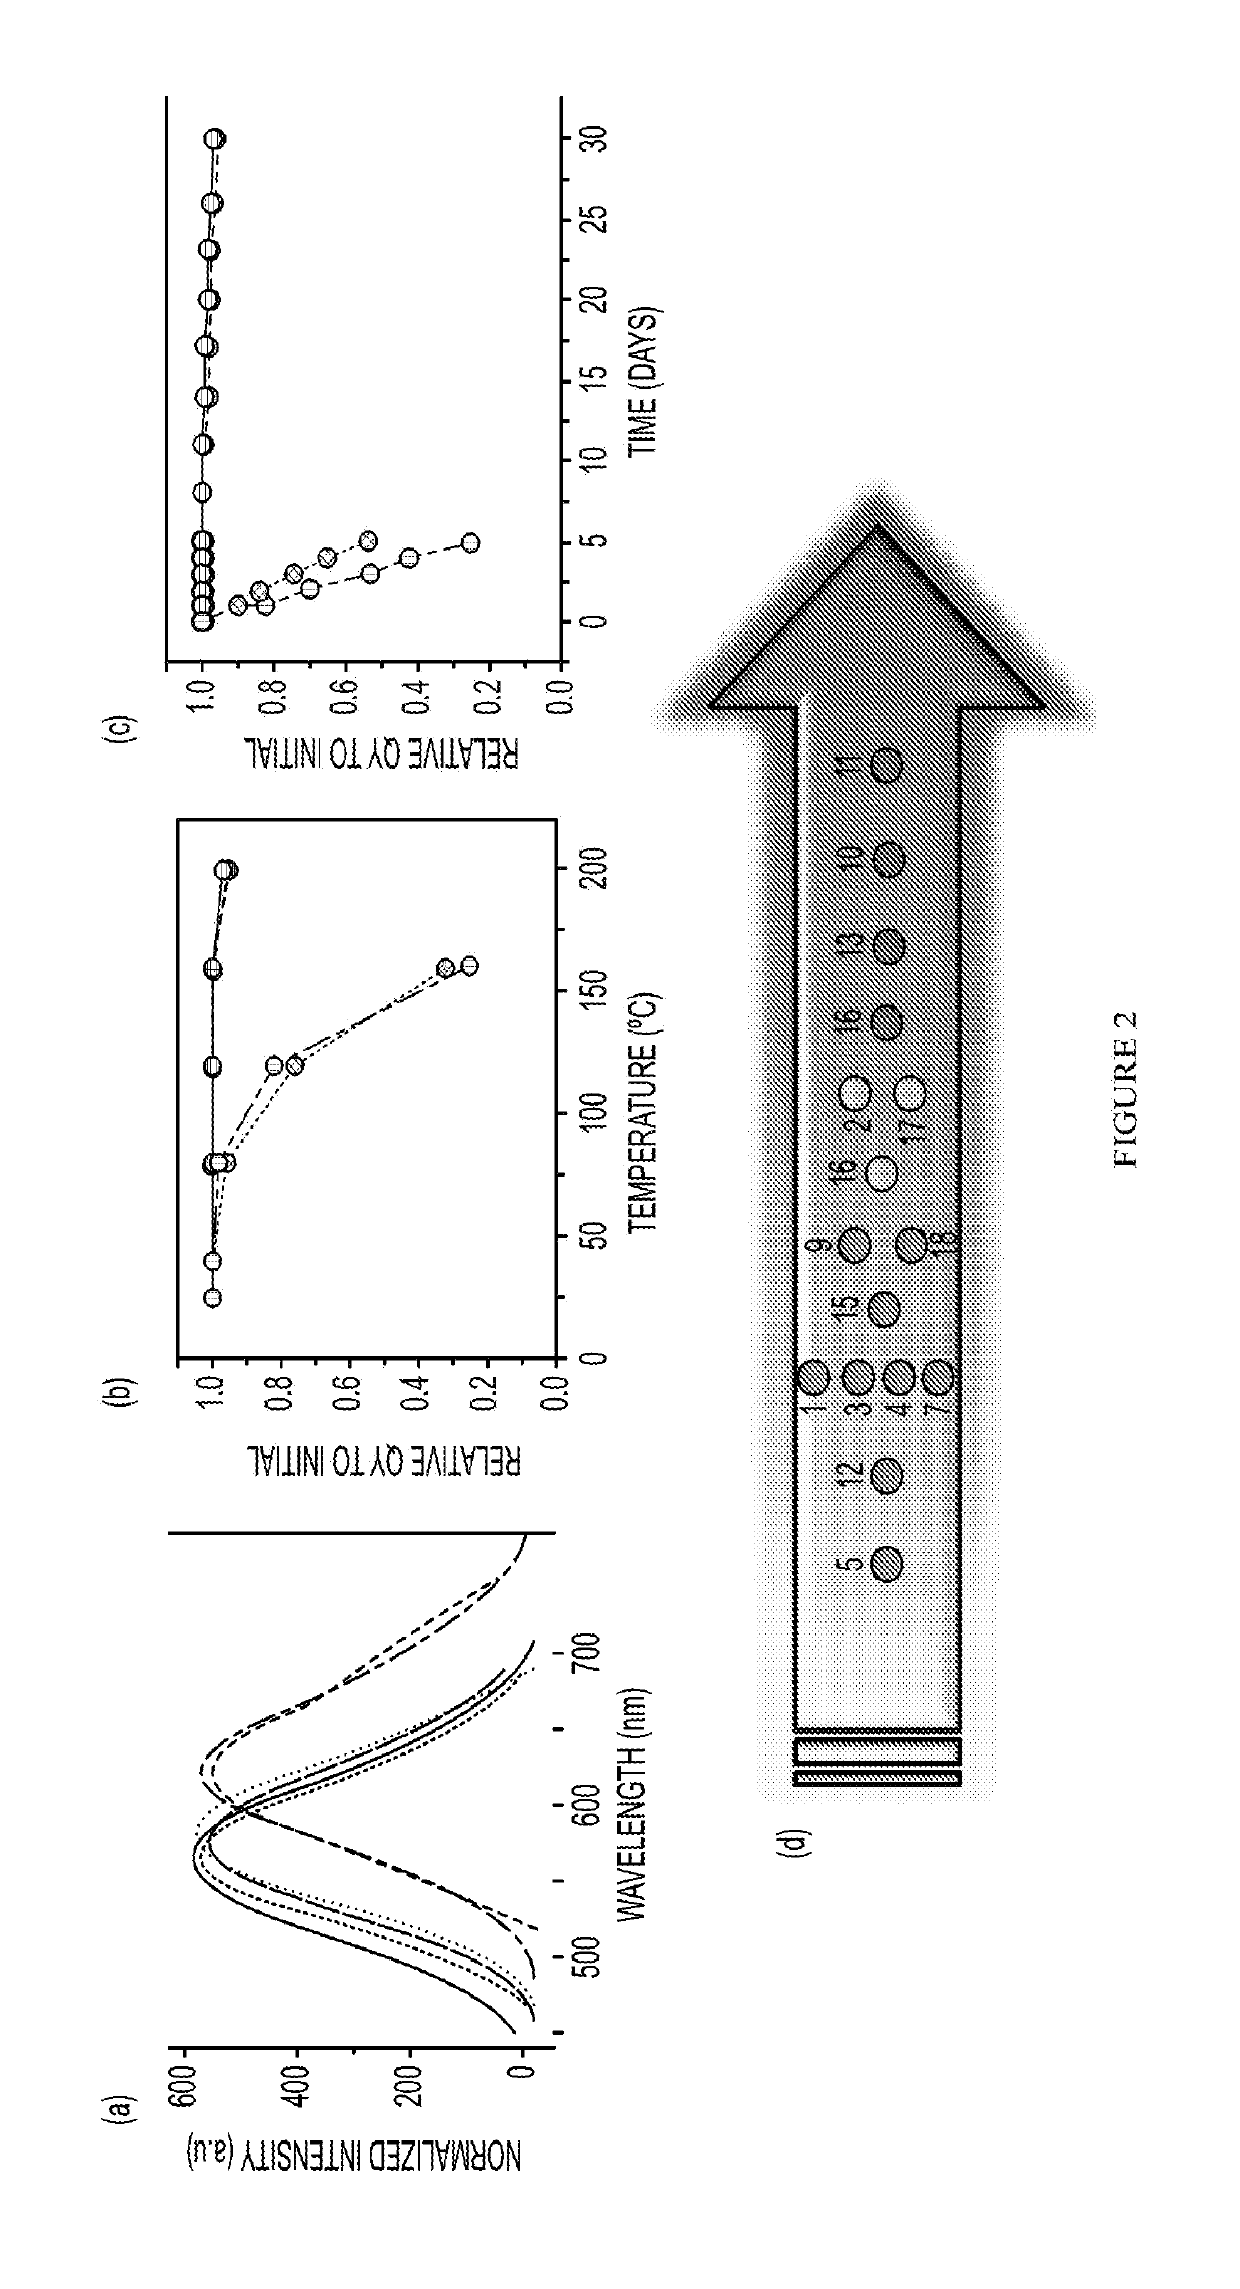 Precursor Based Method of Synthesis and Fabrication of Hybrid Lighting Phosphors with High Quantum Efficiency, and Significantly Enhanced Thermal and Photostability